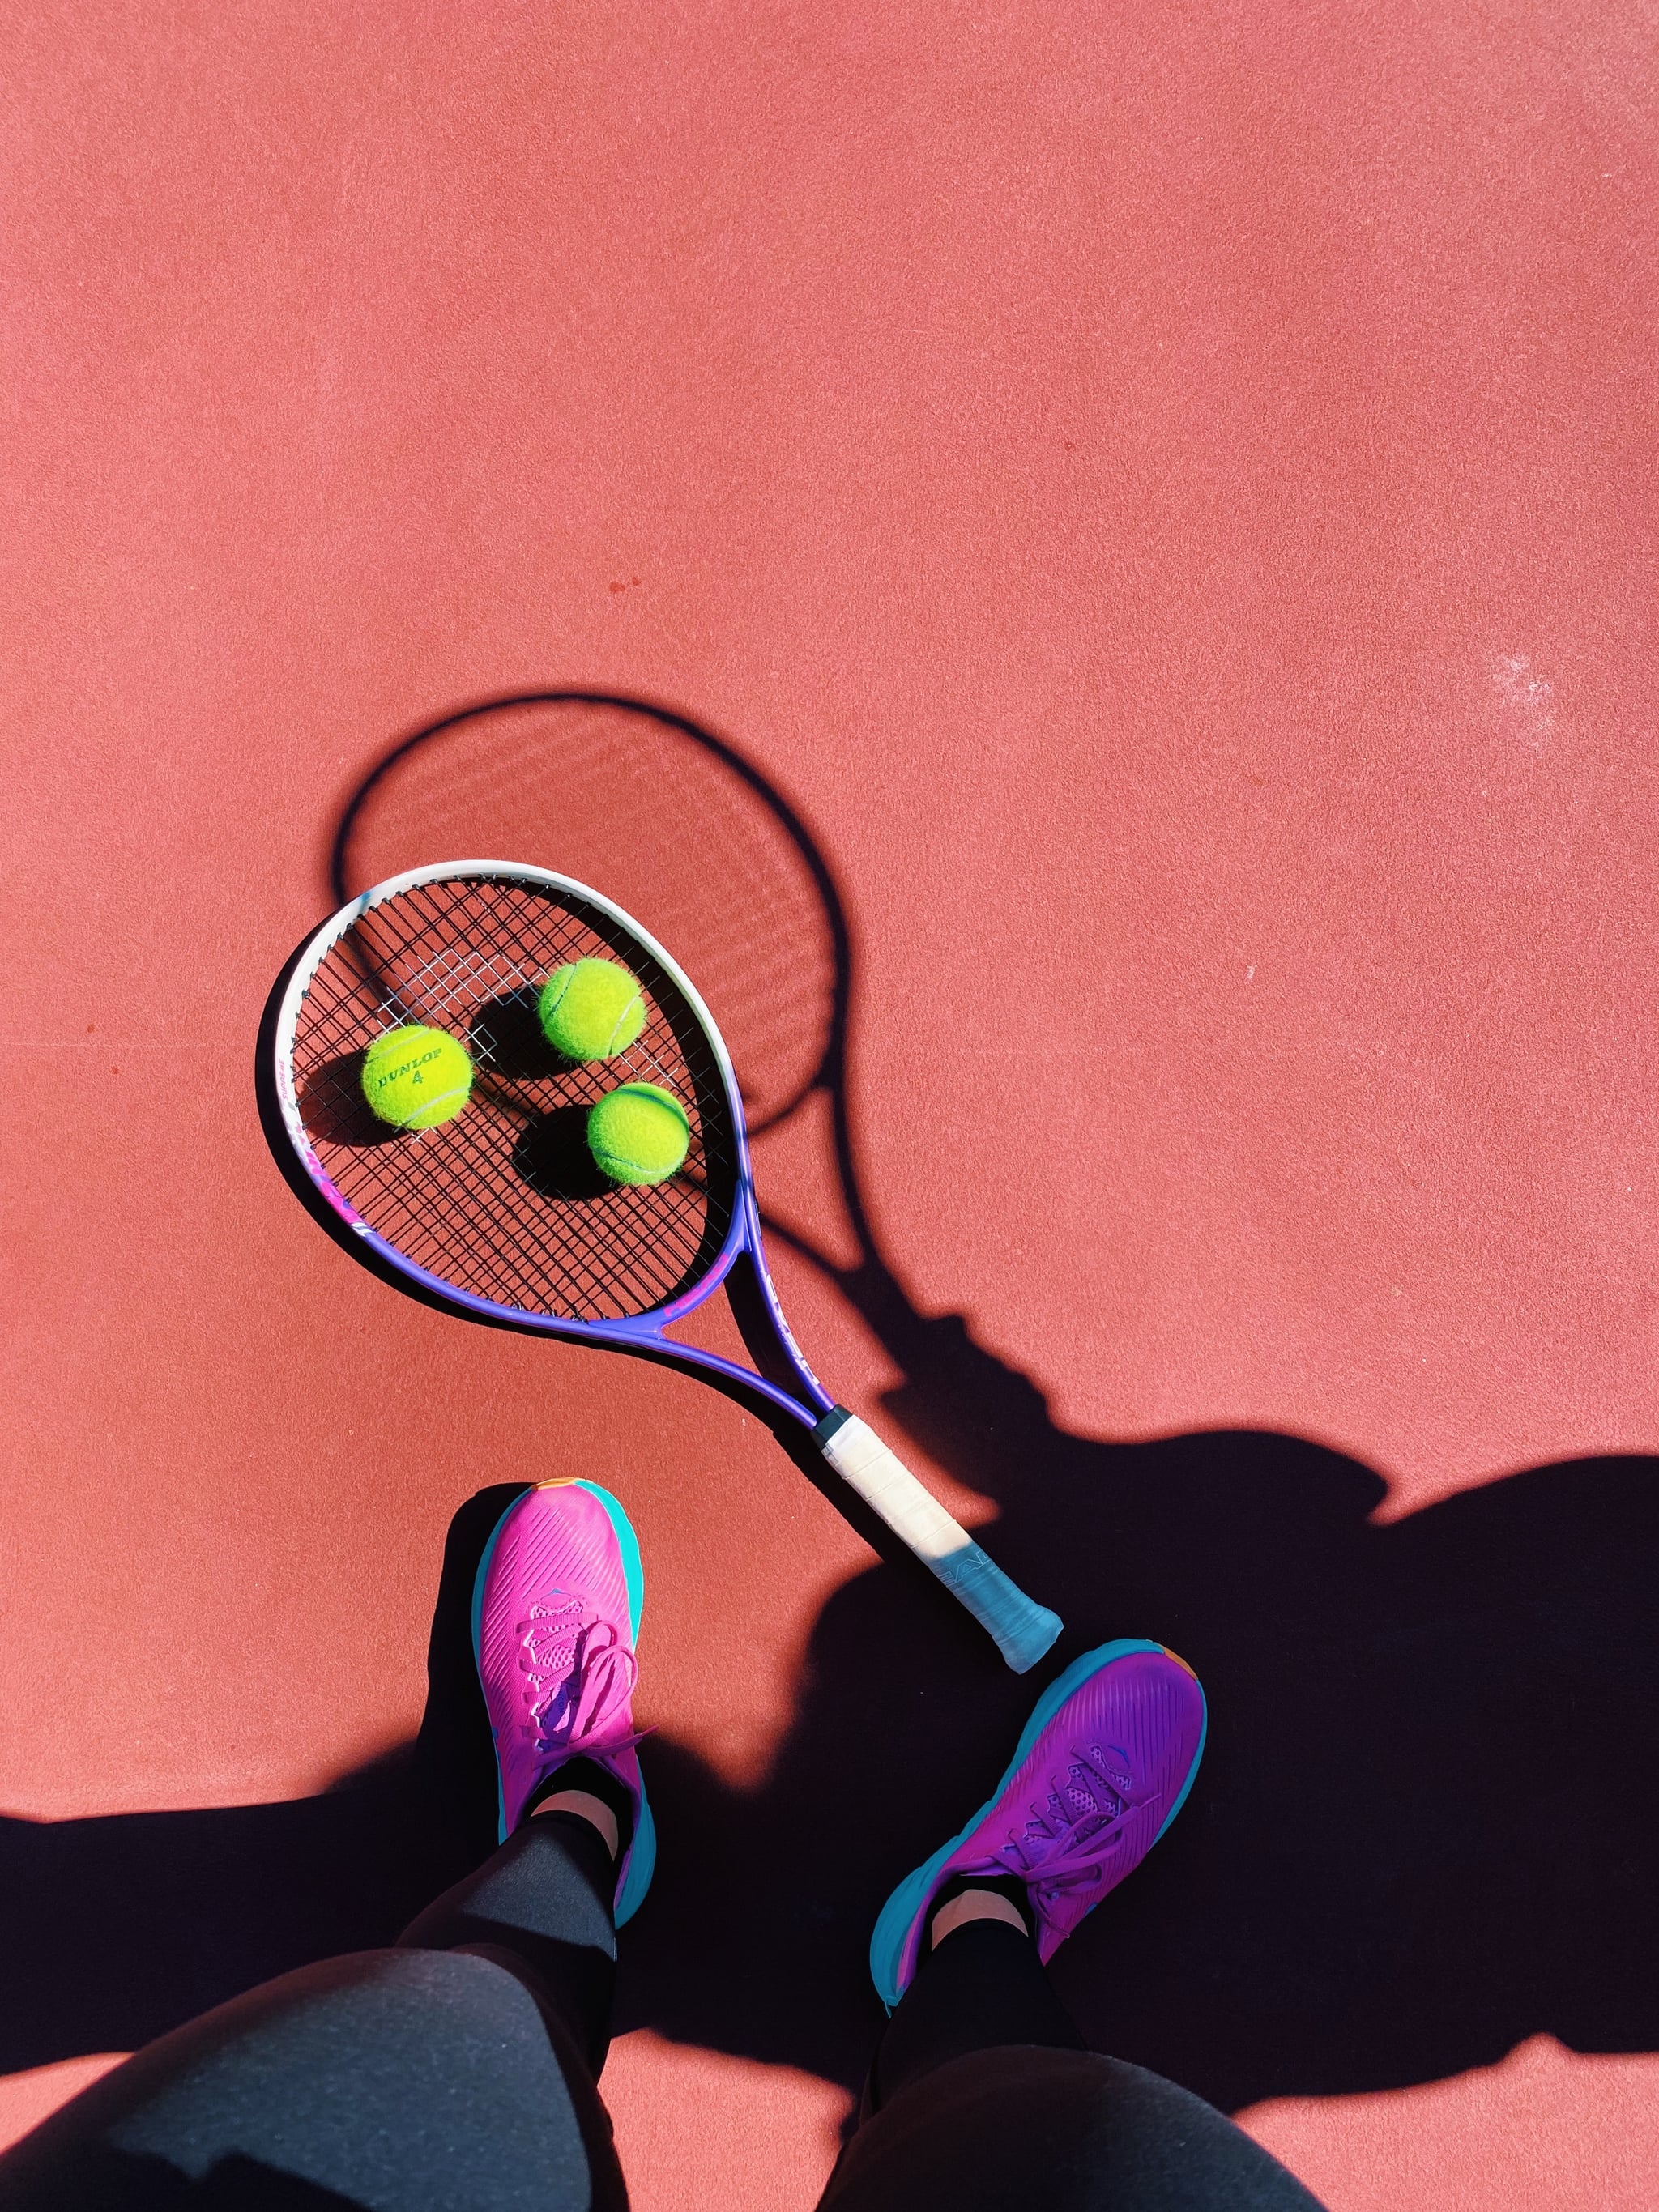 Sport Tennis Wallpaper for iPhone 11 Pro Max X 8 7 6  Free Download  on 3Wallpapers